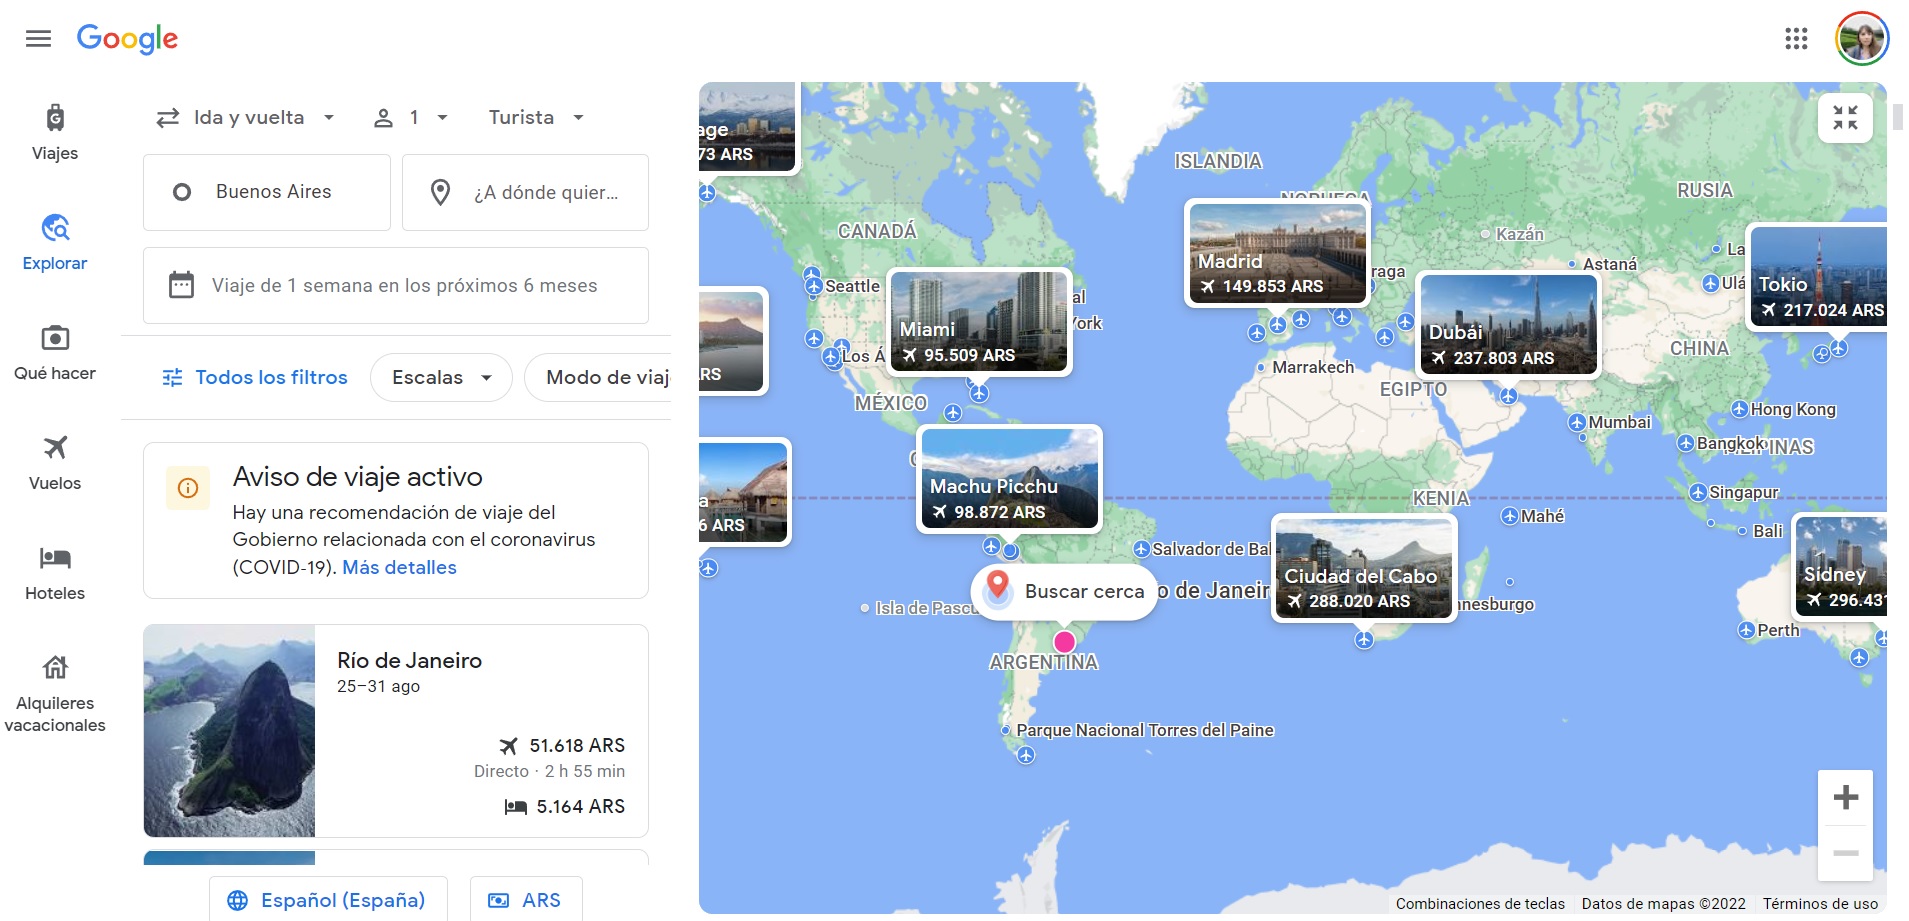 It is possible to set filters based on price, destination, stopovers and airlines